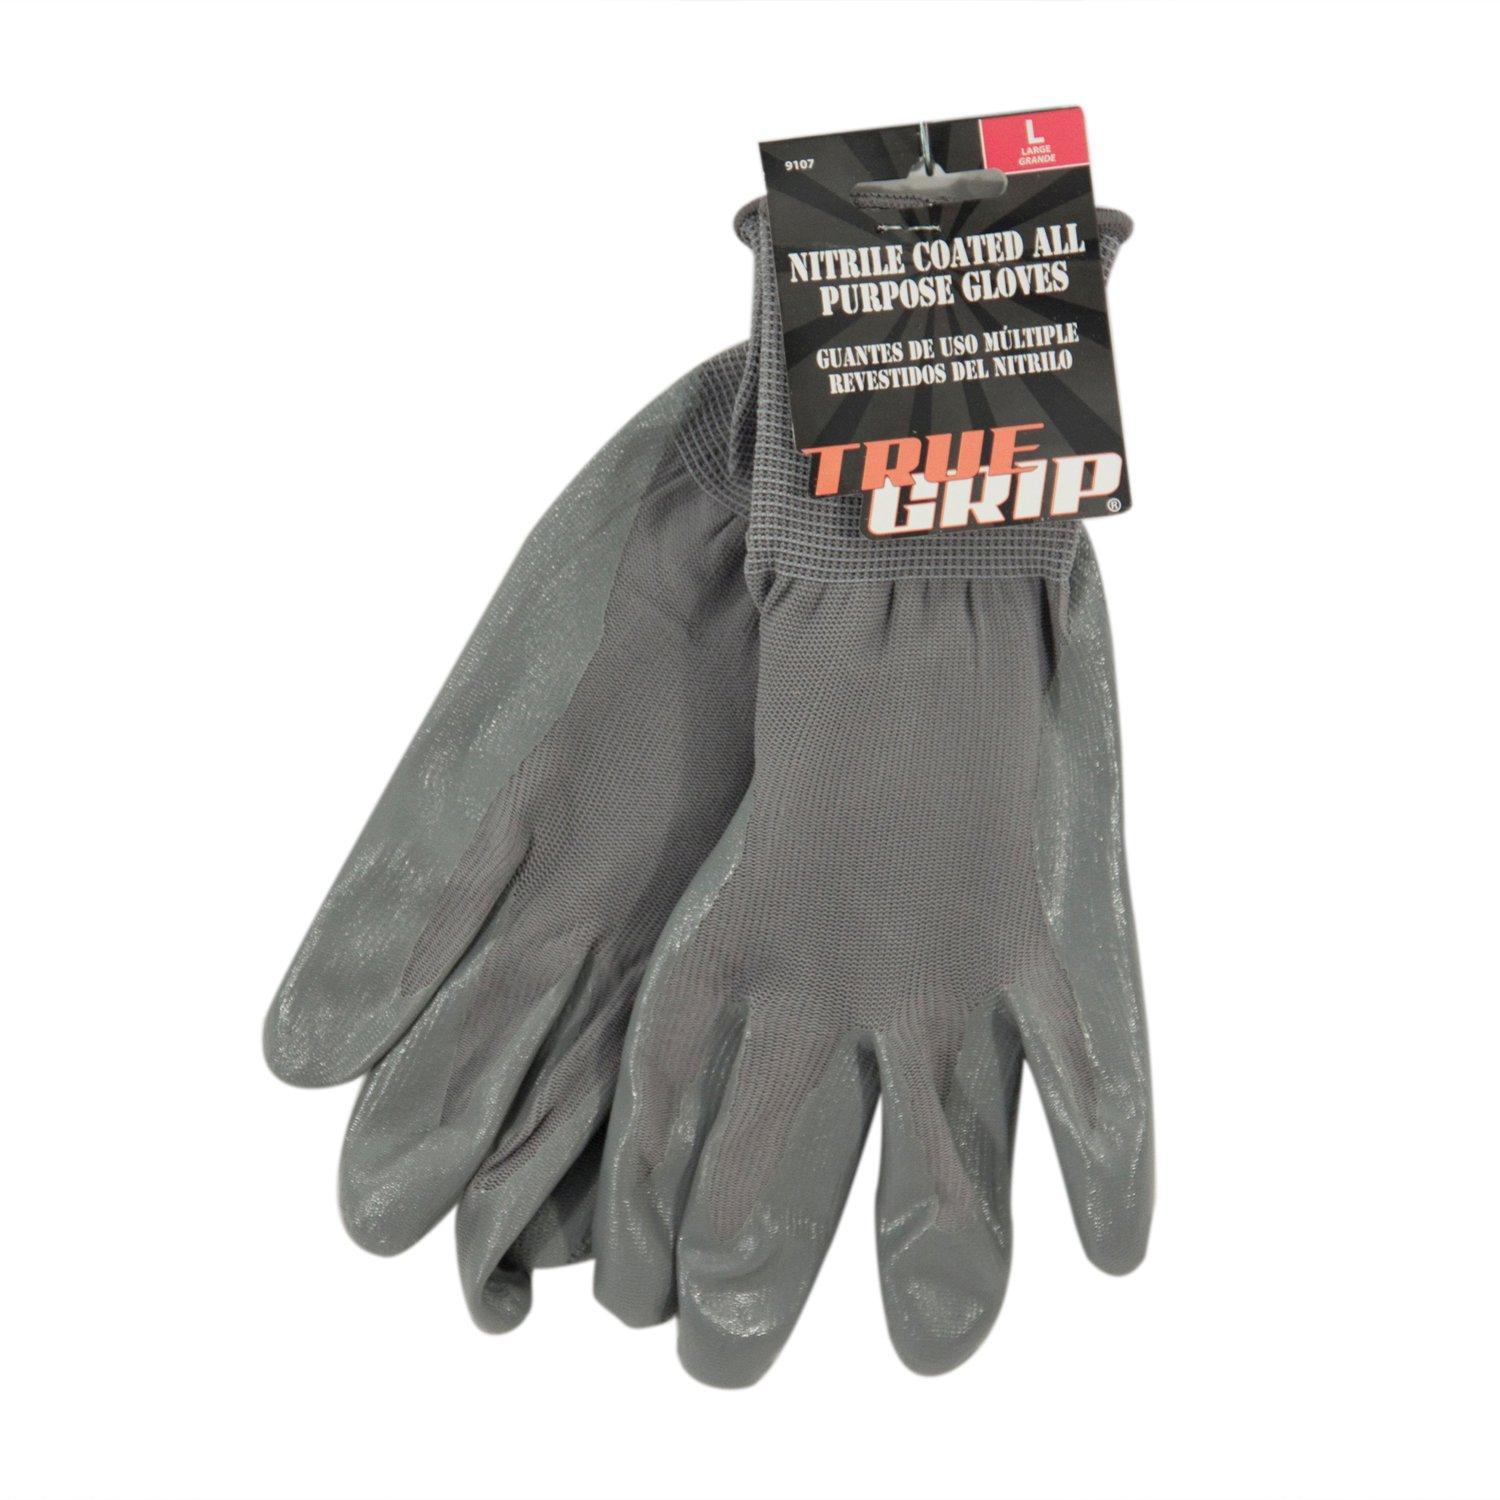 True Grip All Purpose Nitrile Coated Gloves Large